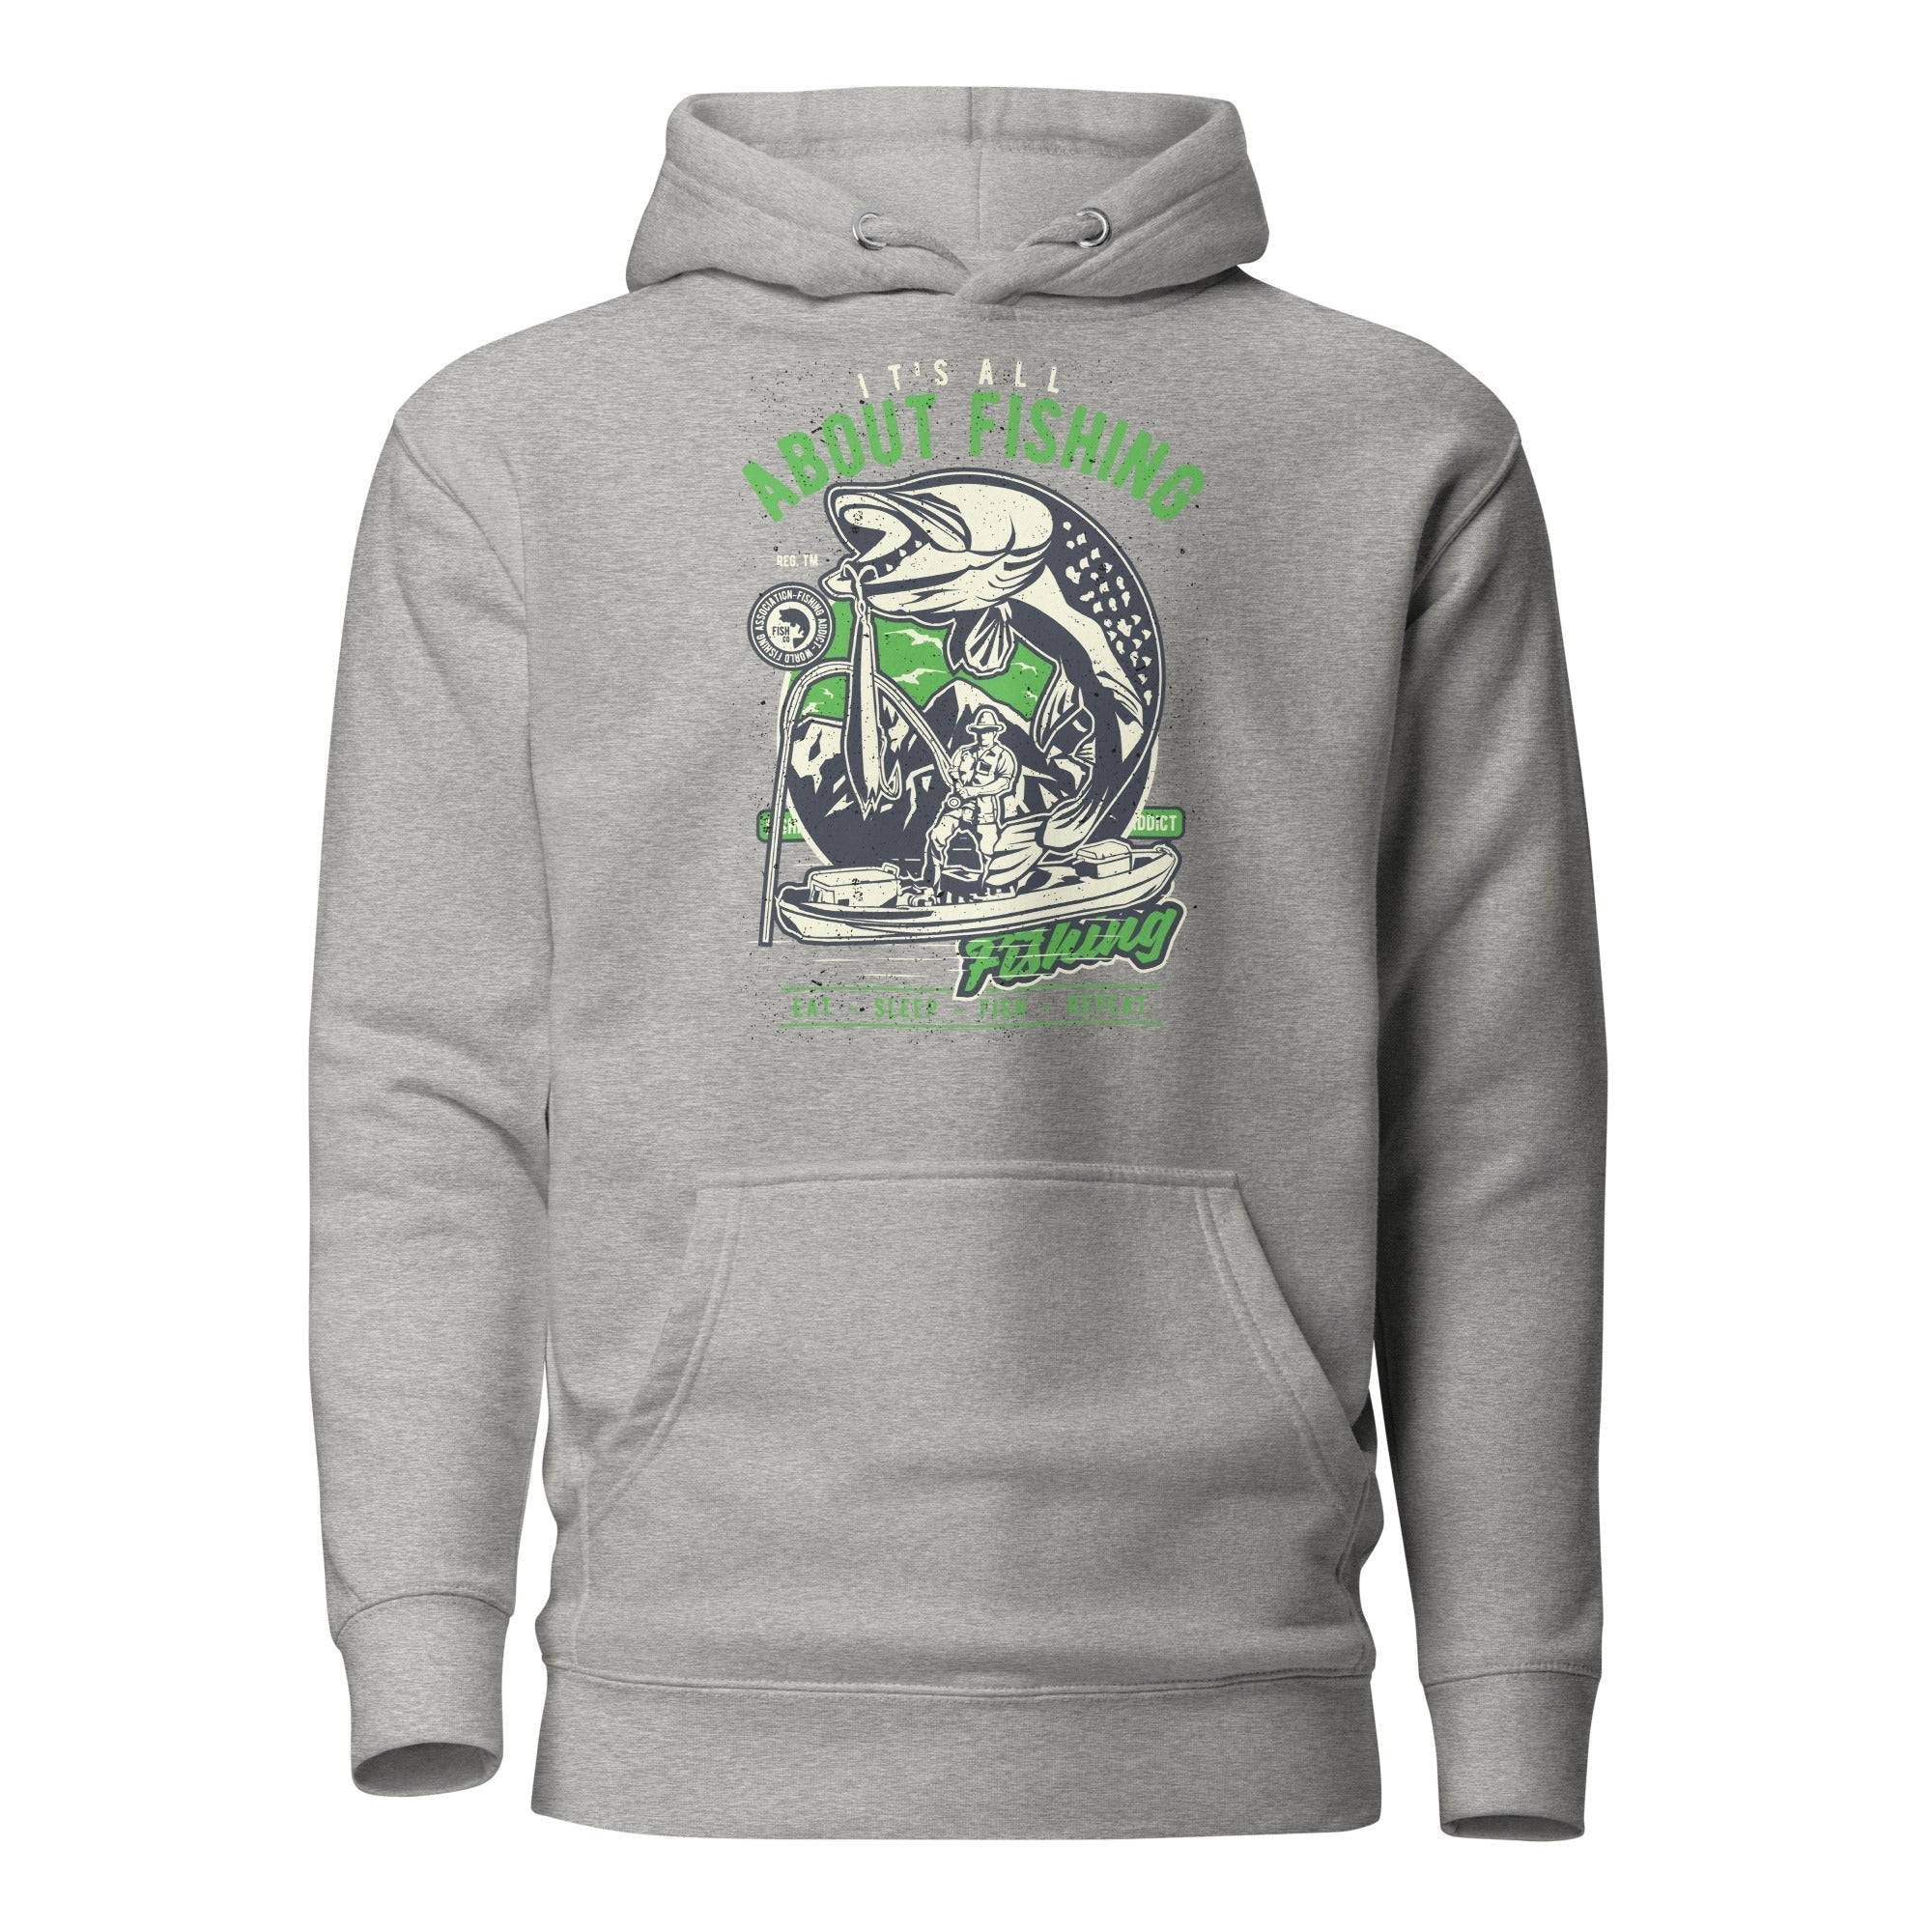 Unisex Premium Hoodie - Cotton Heritage - It's All About Fishing Eat Sleep Fish Repeat - GRAPHIC T-SHIRTS